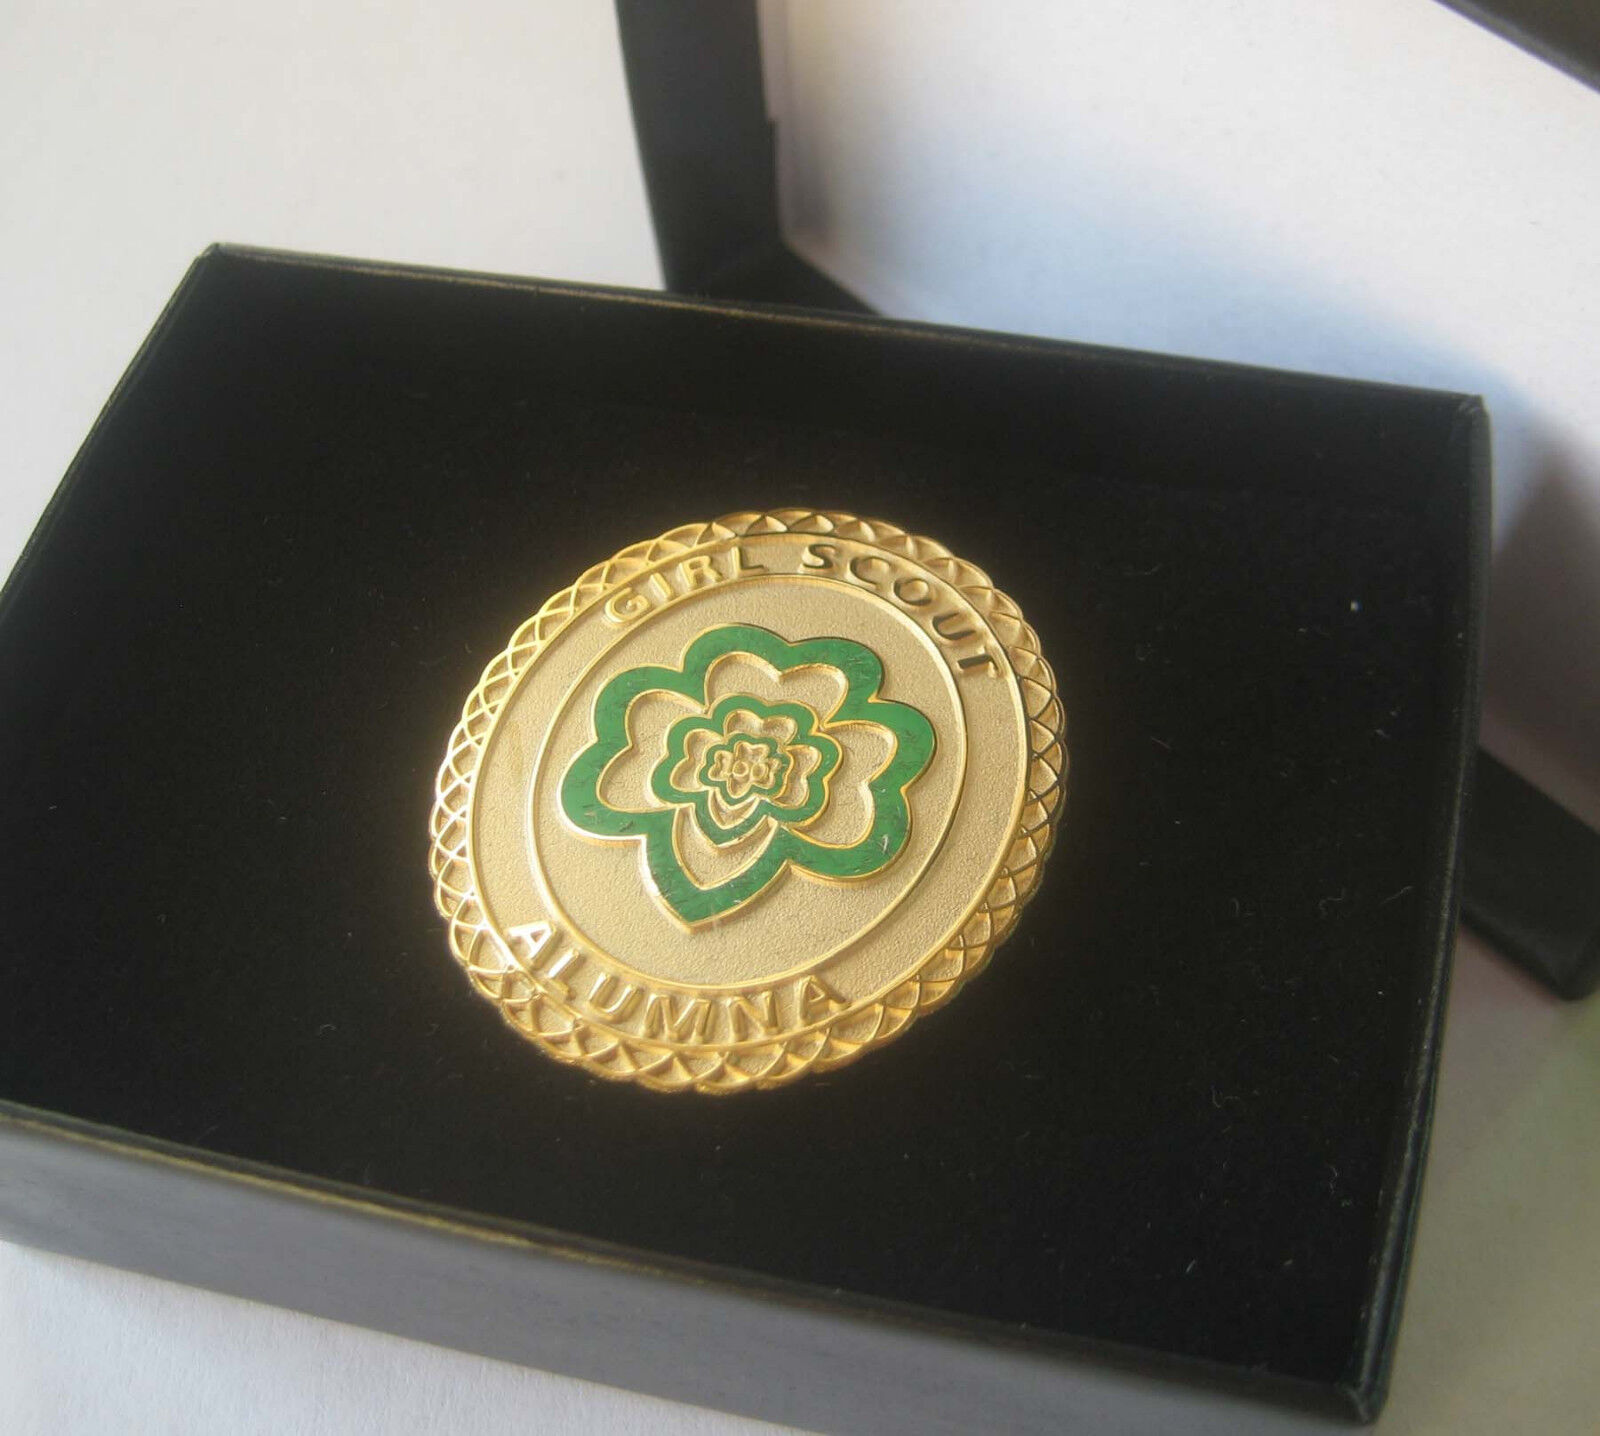 Girl Scout 100 Anniversary ALUMNA BROOCH Gold Broach Pin Jewelry Leader GIFT New